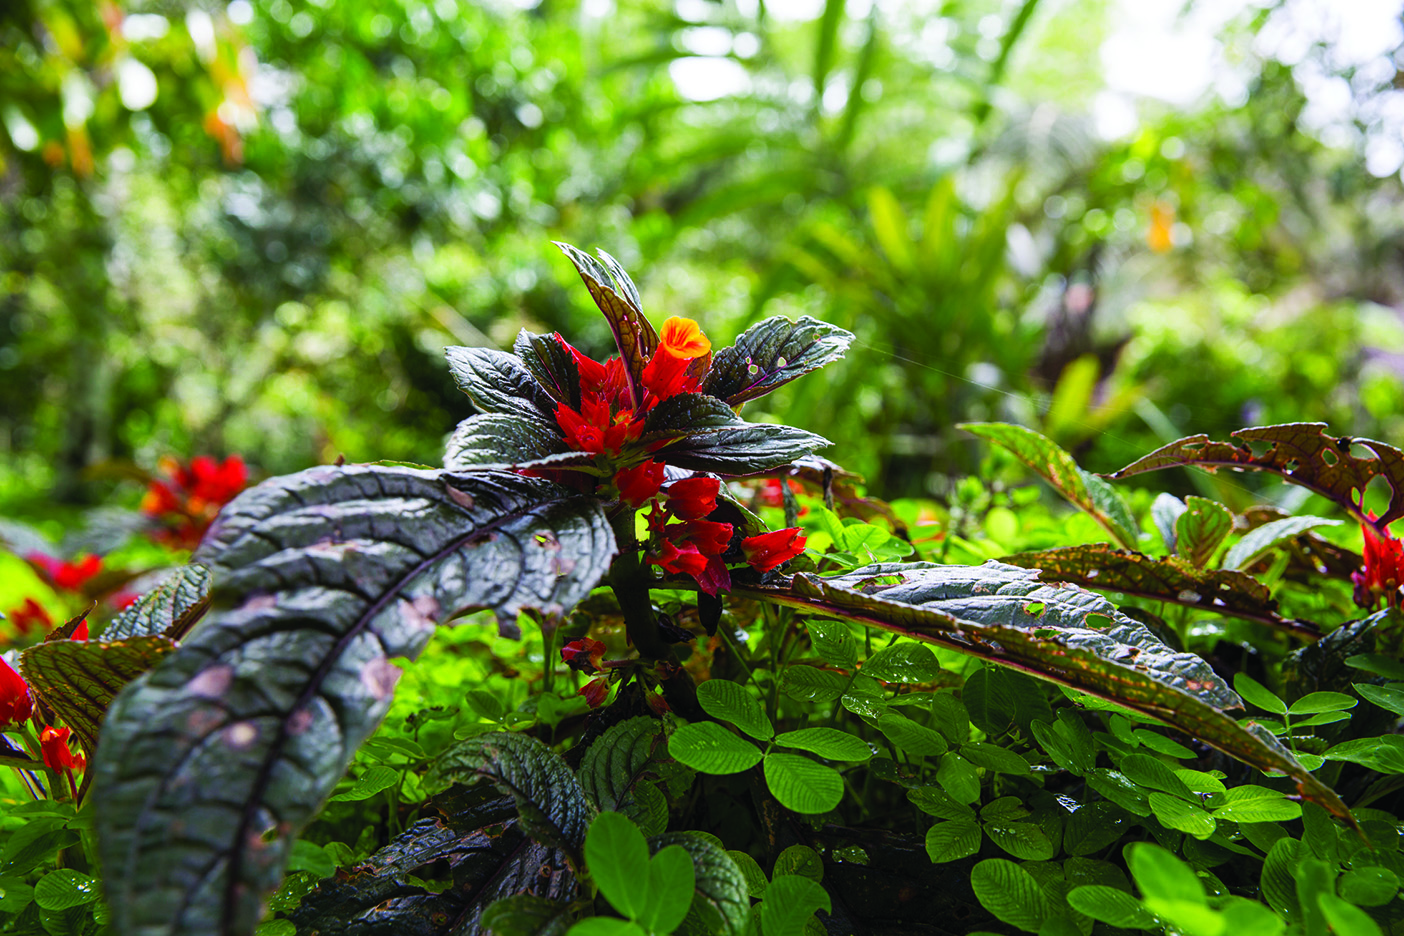 A beautiful rainforest plant with red flowers